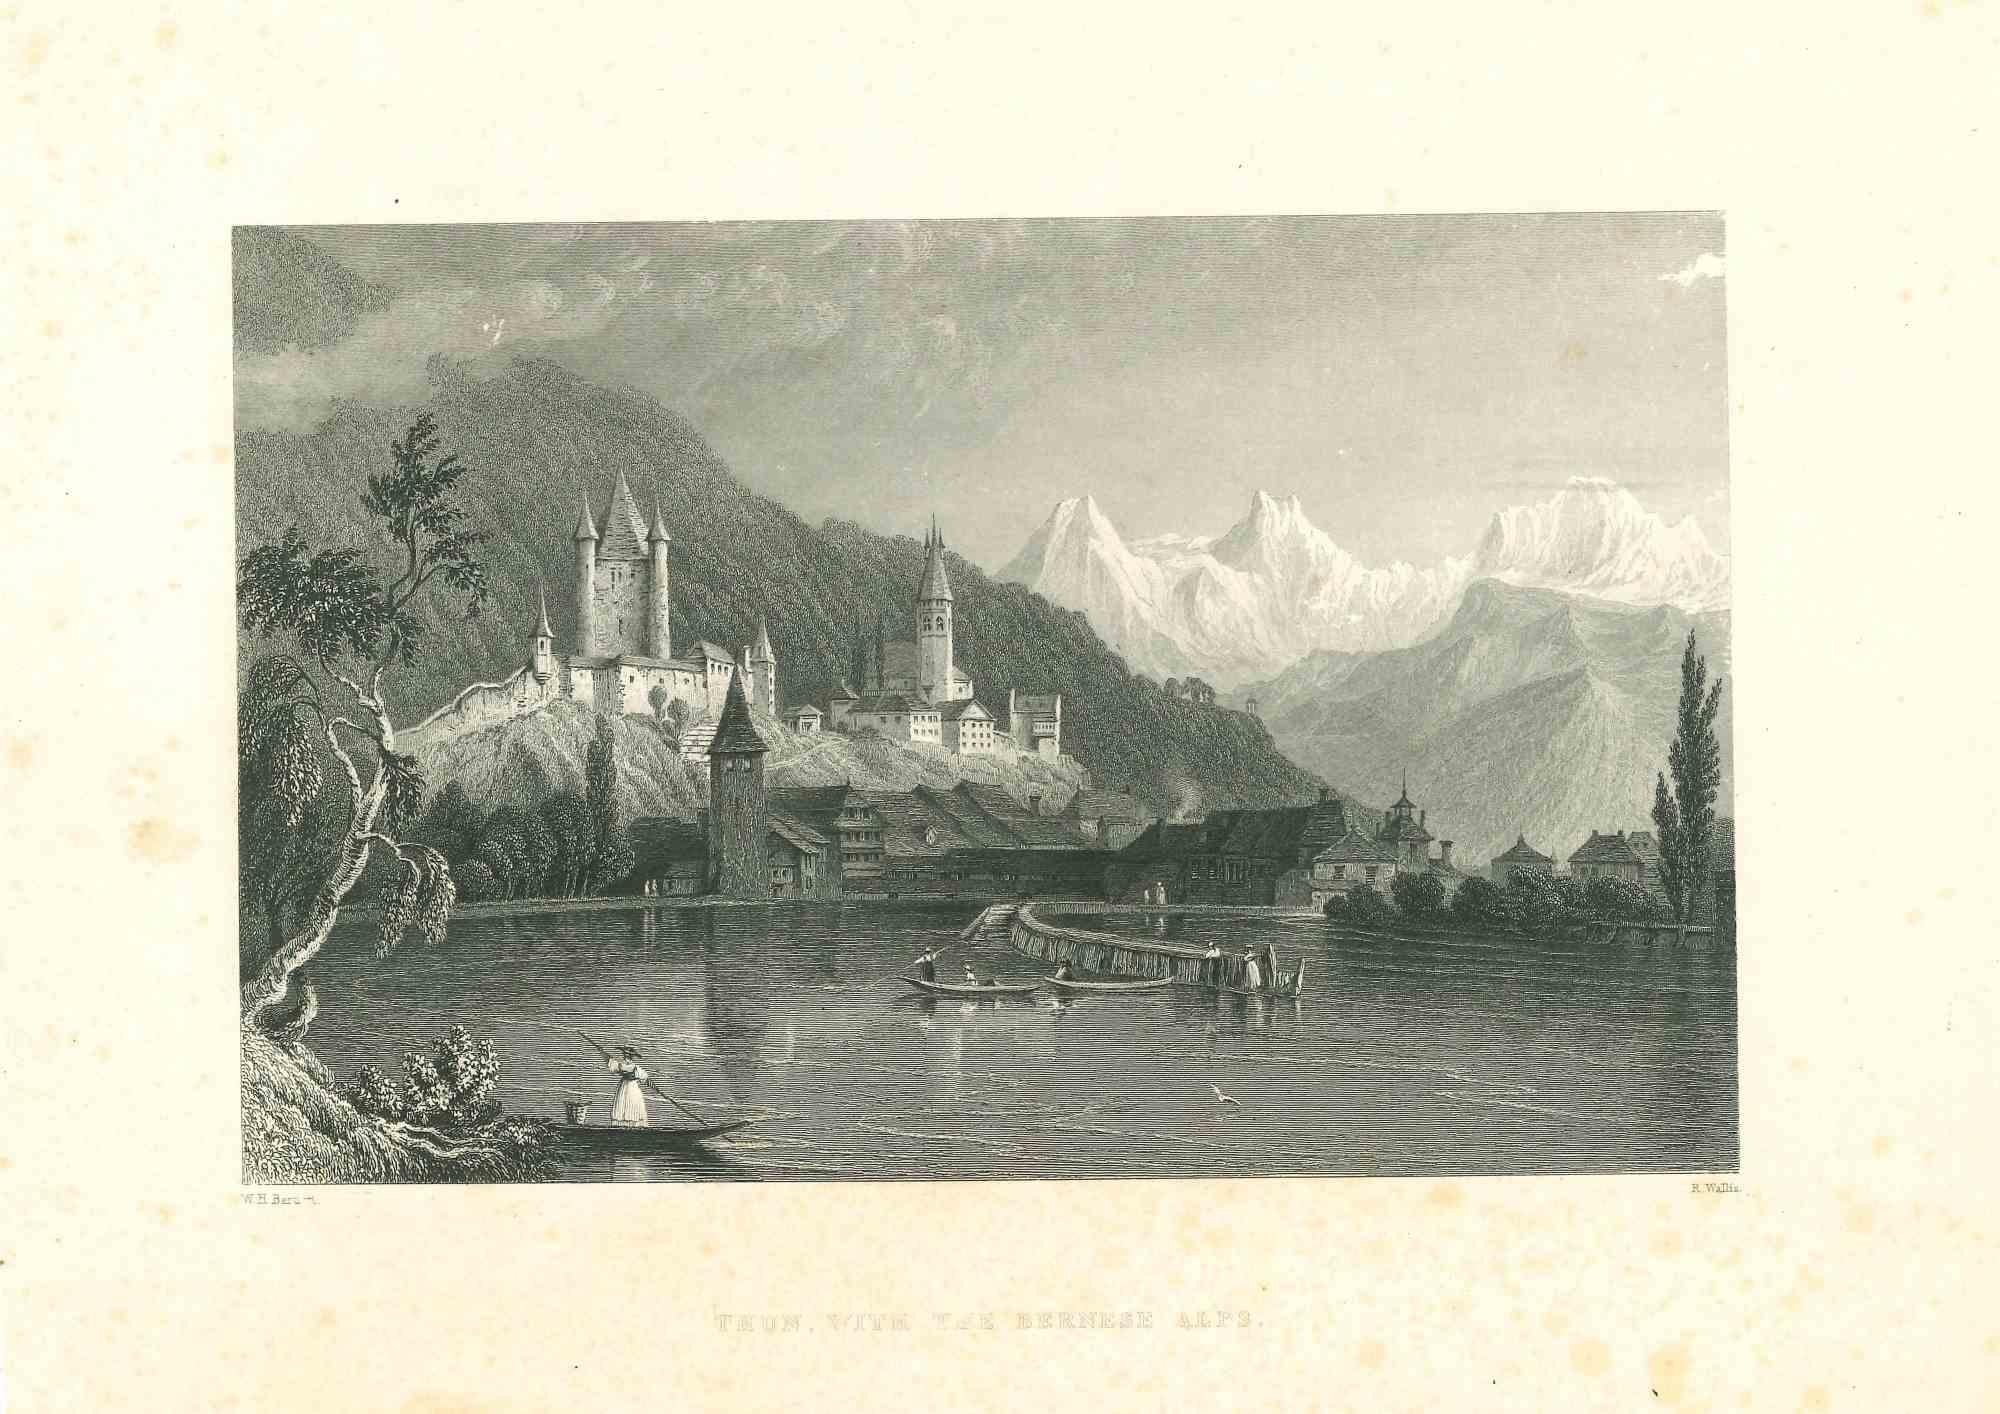 Unknown Figurative Print - Ancient View of Thun - Original Lithograph - Mid-19th Century